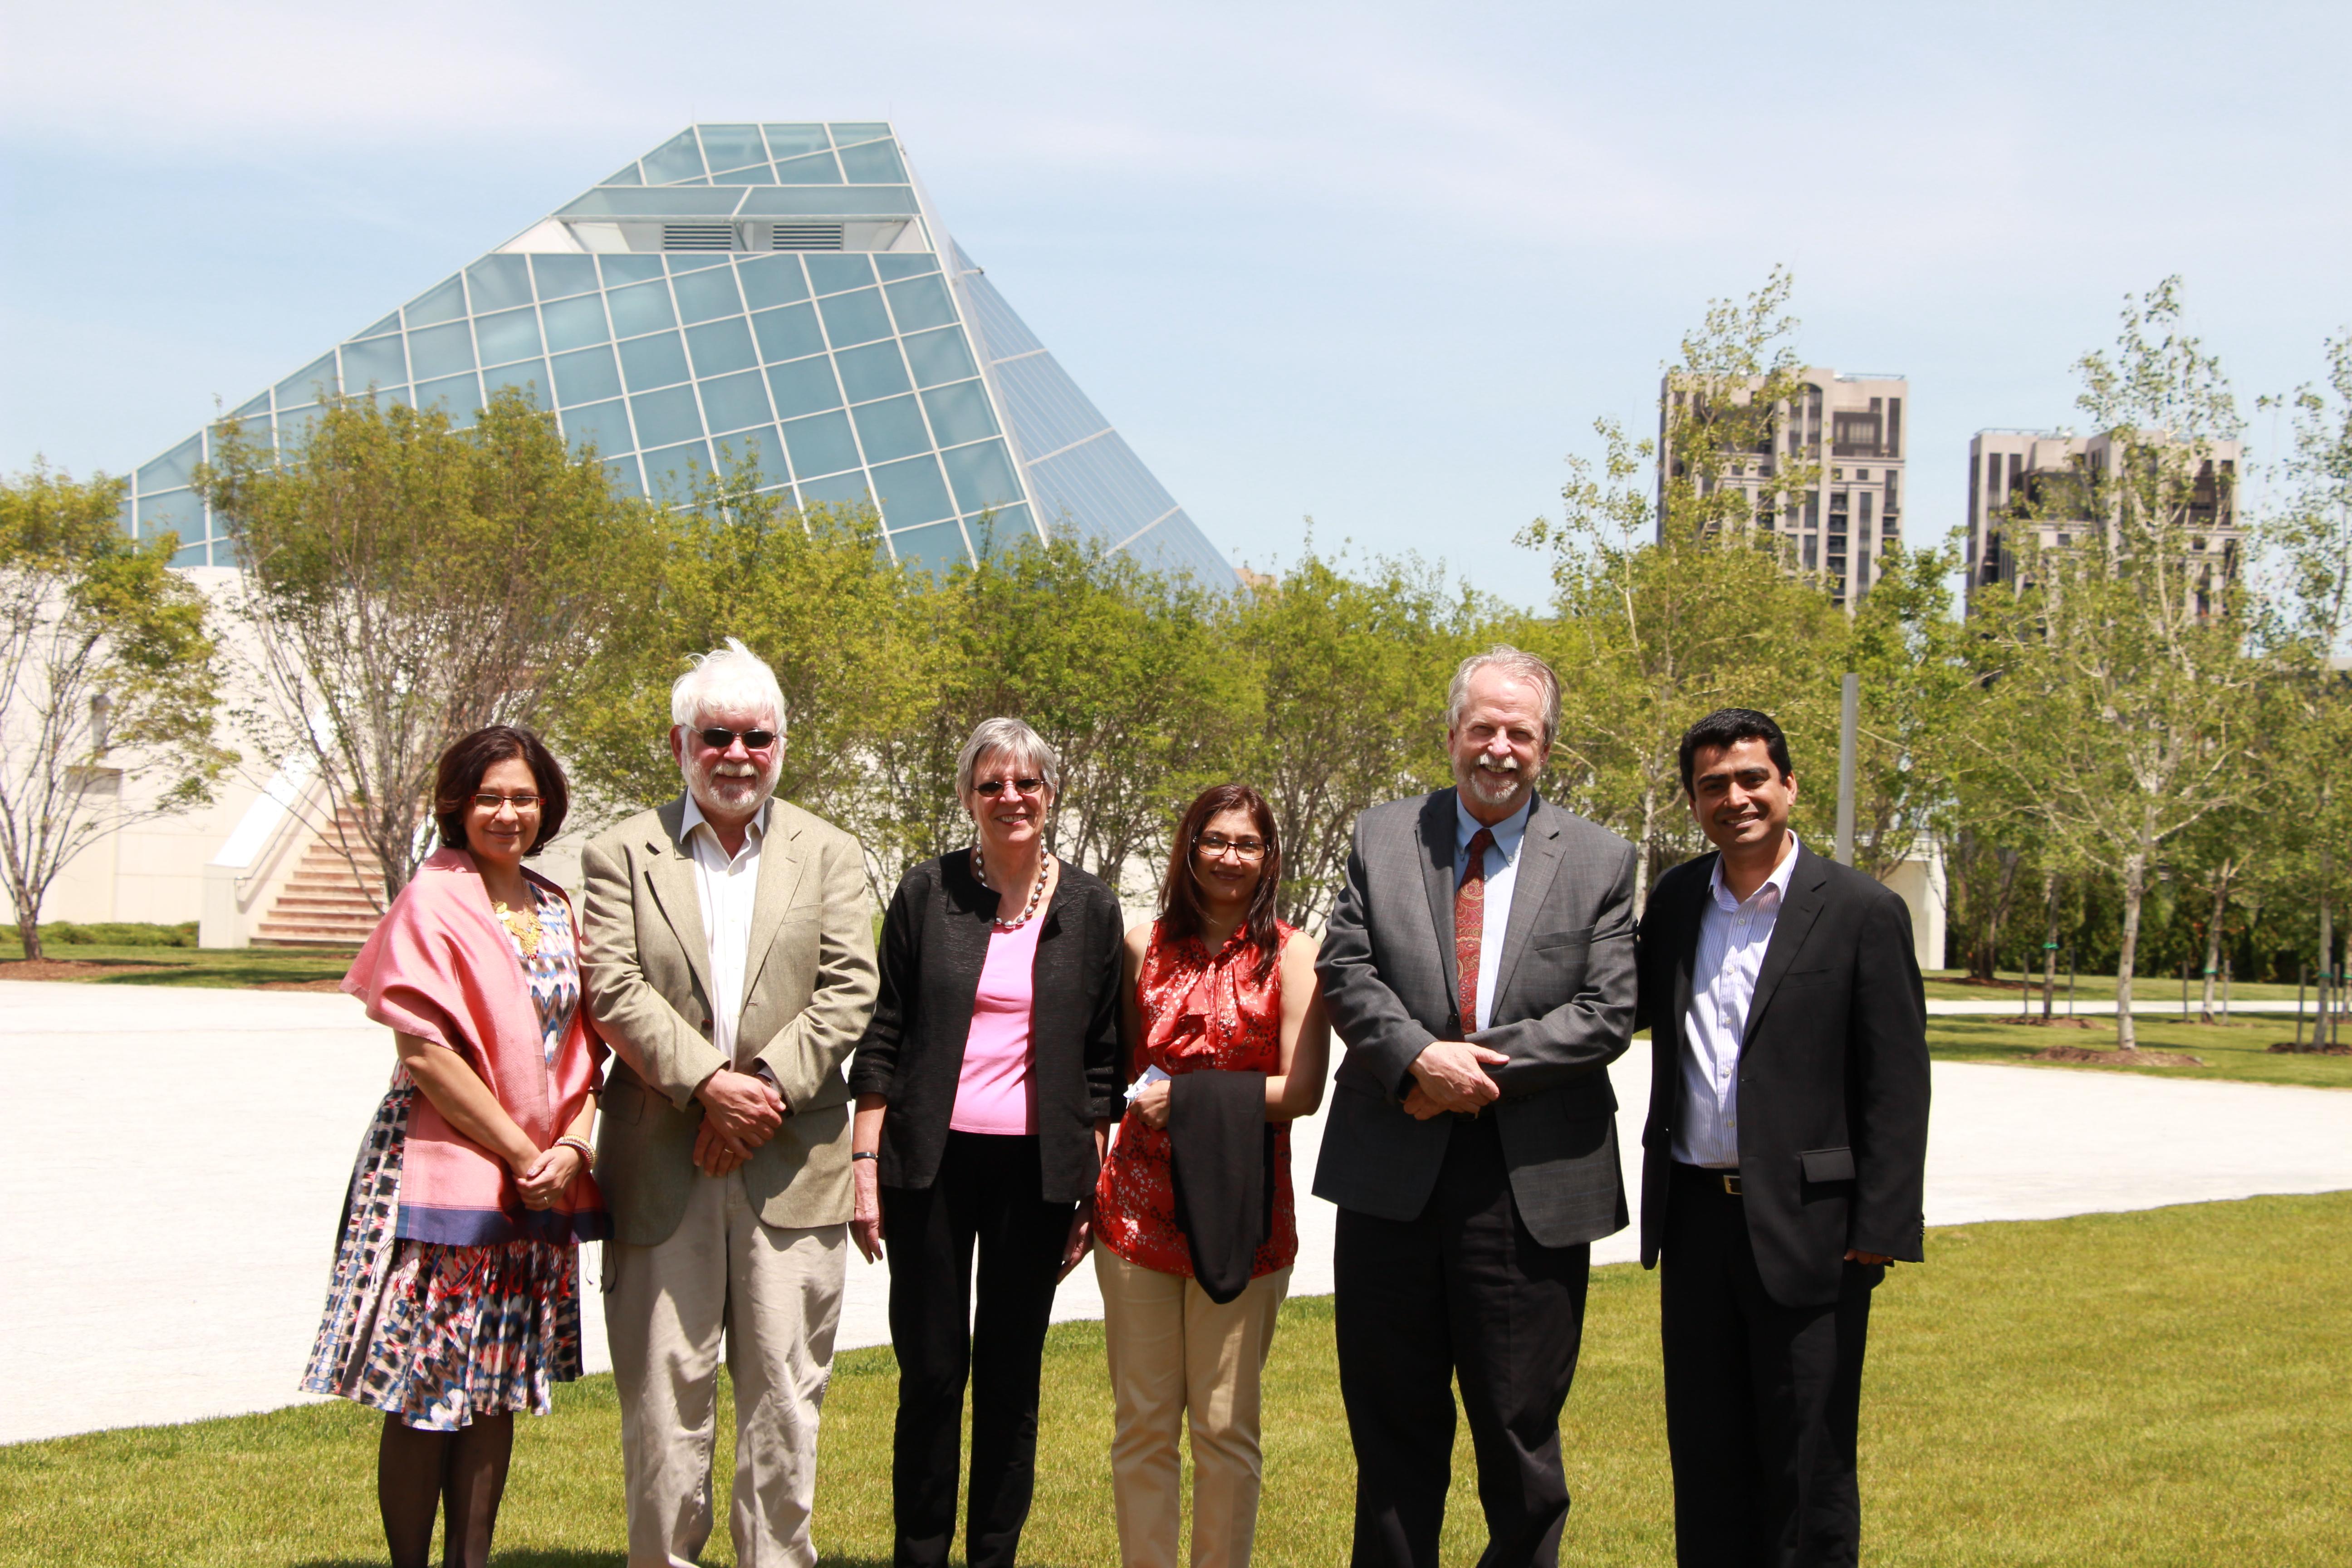 Chapter Group Leaders and Speakers, against the backdrop of The Ismaili Centre, Toronto